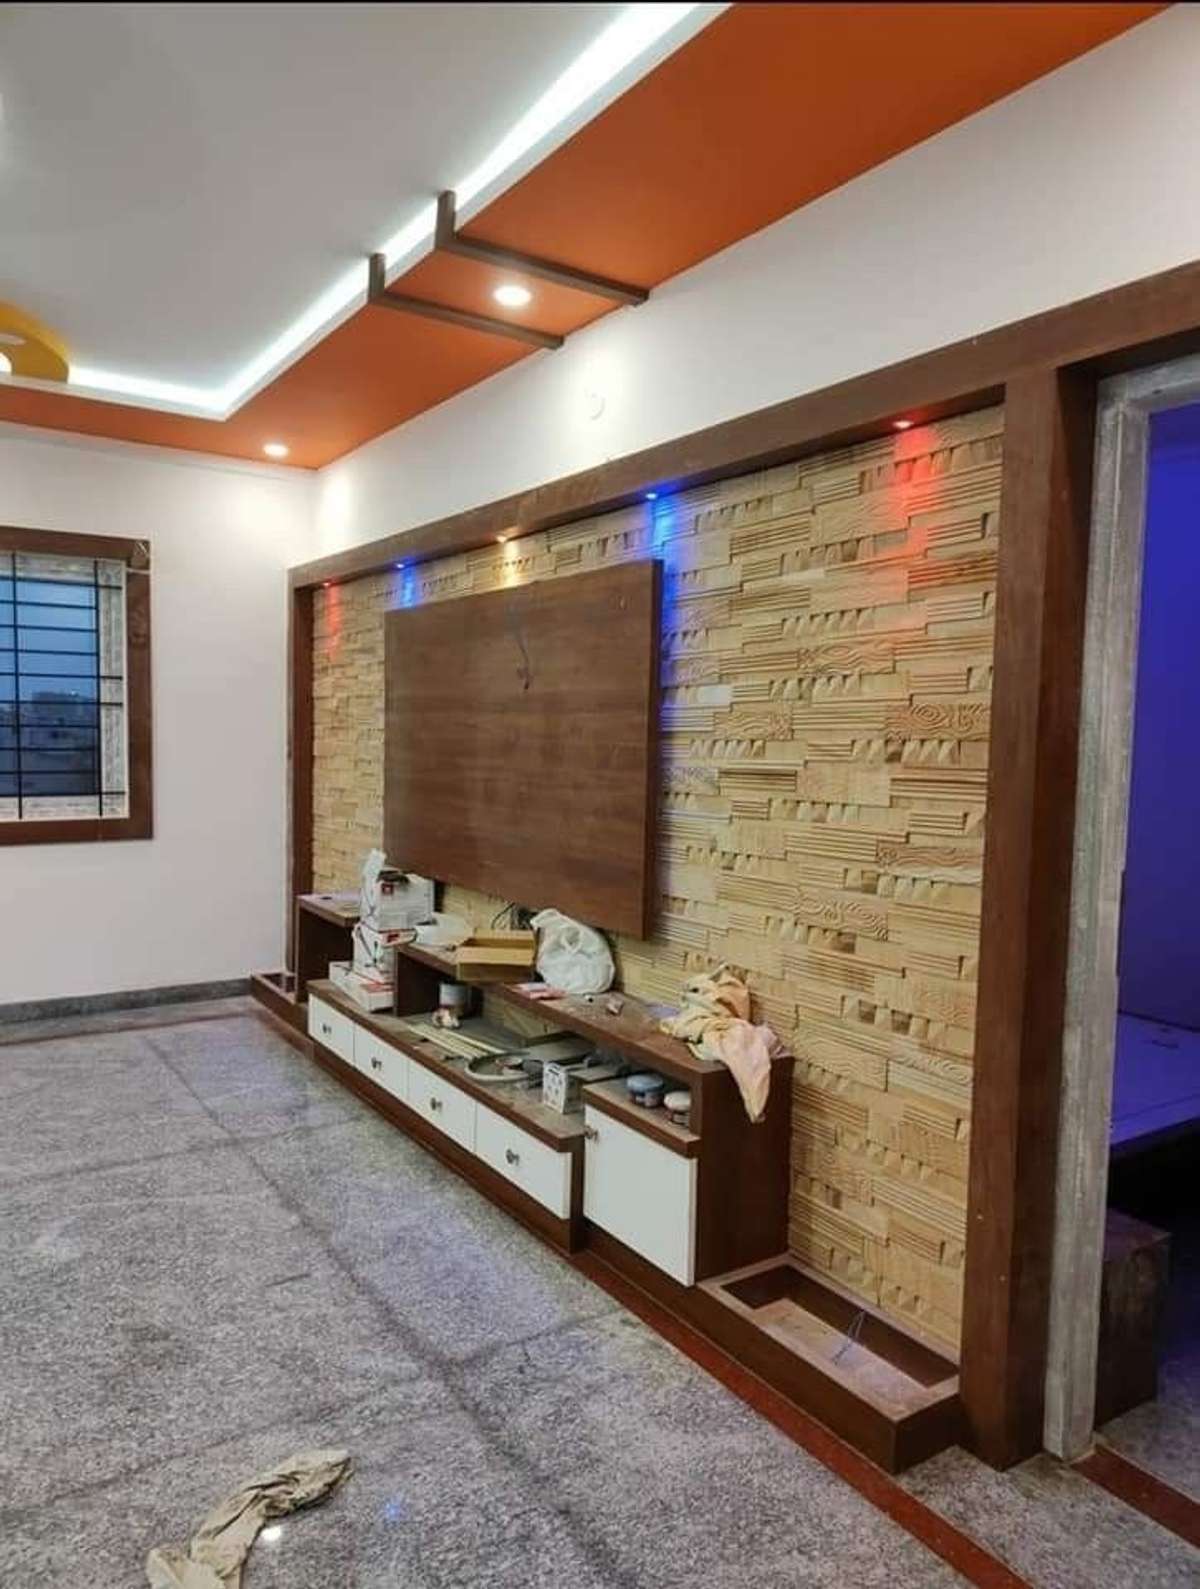 Contact👉https://wa.me/919927288882 
99 272 888 82 Call Me FOR Carpenters
modular  kitchen, wardrobes, false ceiling, cots, Study table, everything you needs
I work only in labour square feet material you should give me, Carpenters available in All Kerala,
_________________________________________________________________________